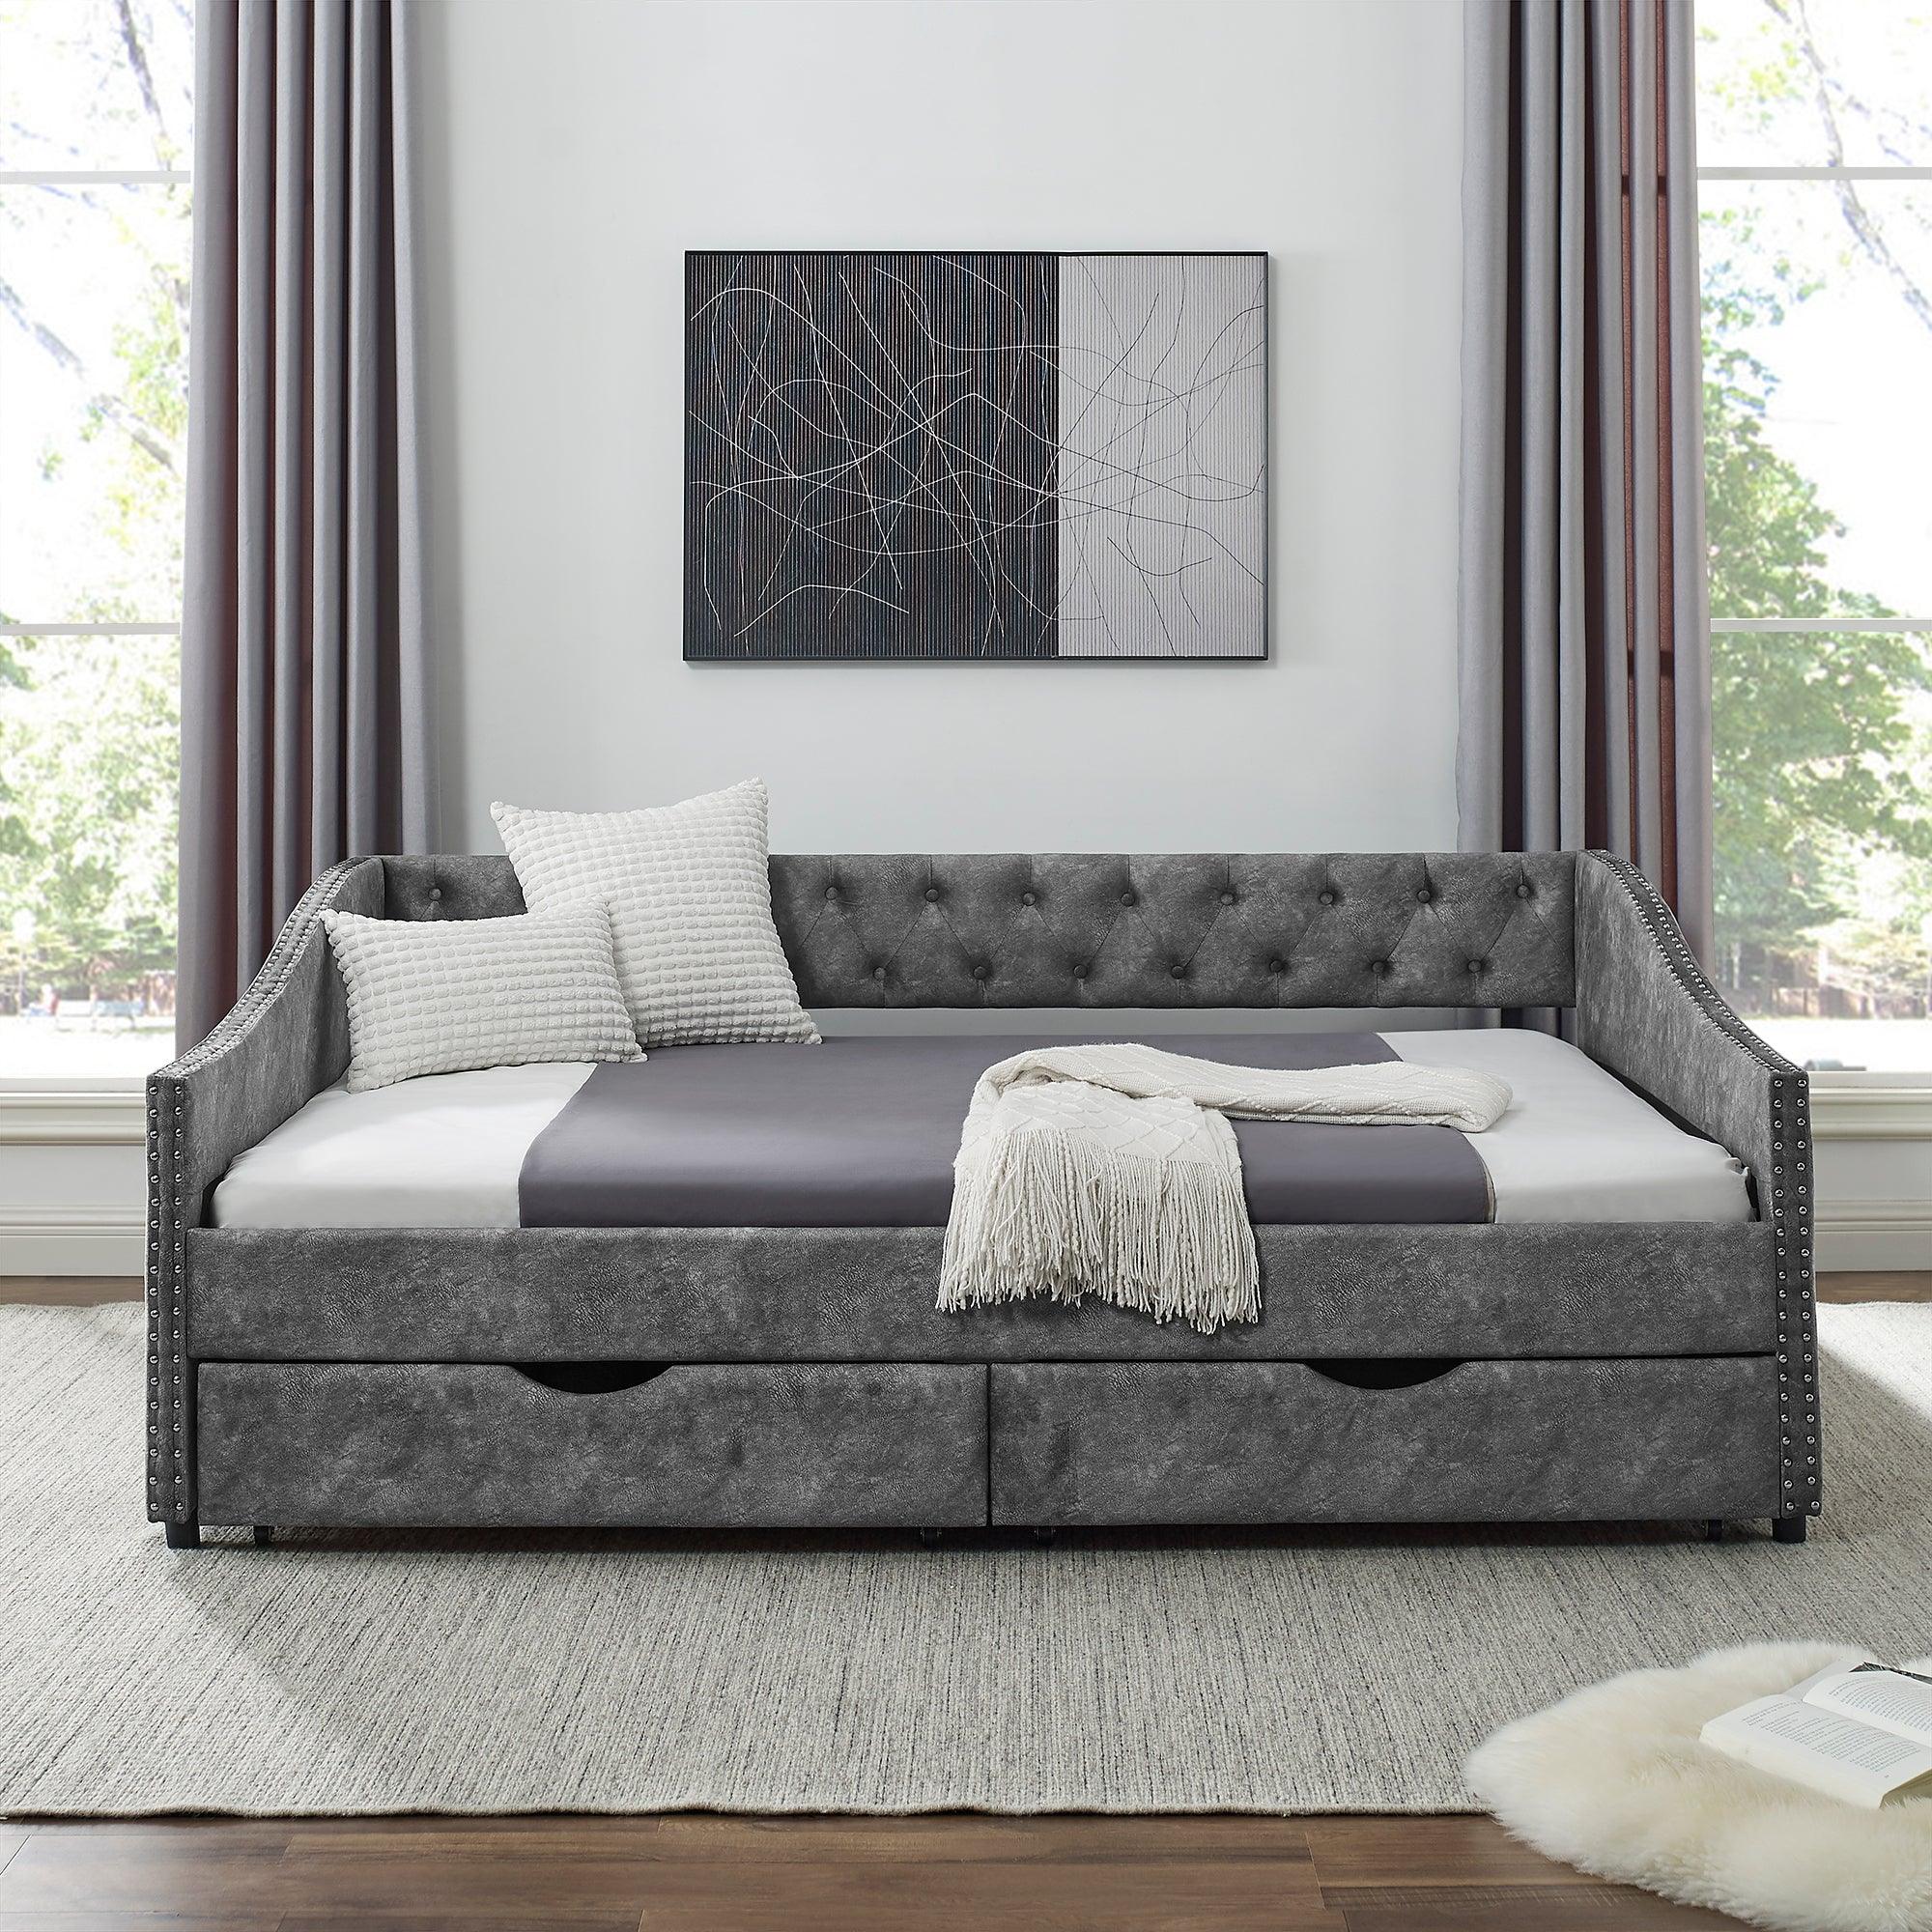 Full Size Daybed With Drawers Upholstered Tufted Sofa Bed, With Button On Back And Copper Nail On Waved Shape Arms?Gray?80.5“X55.5”X27.5“?